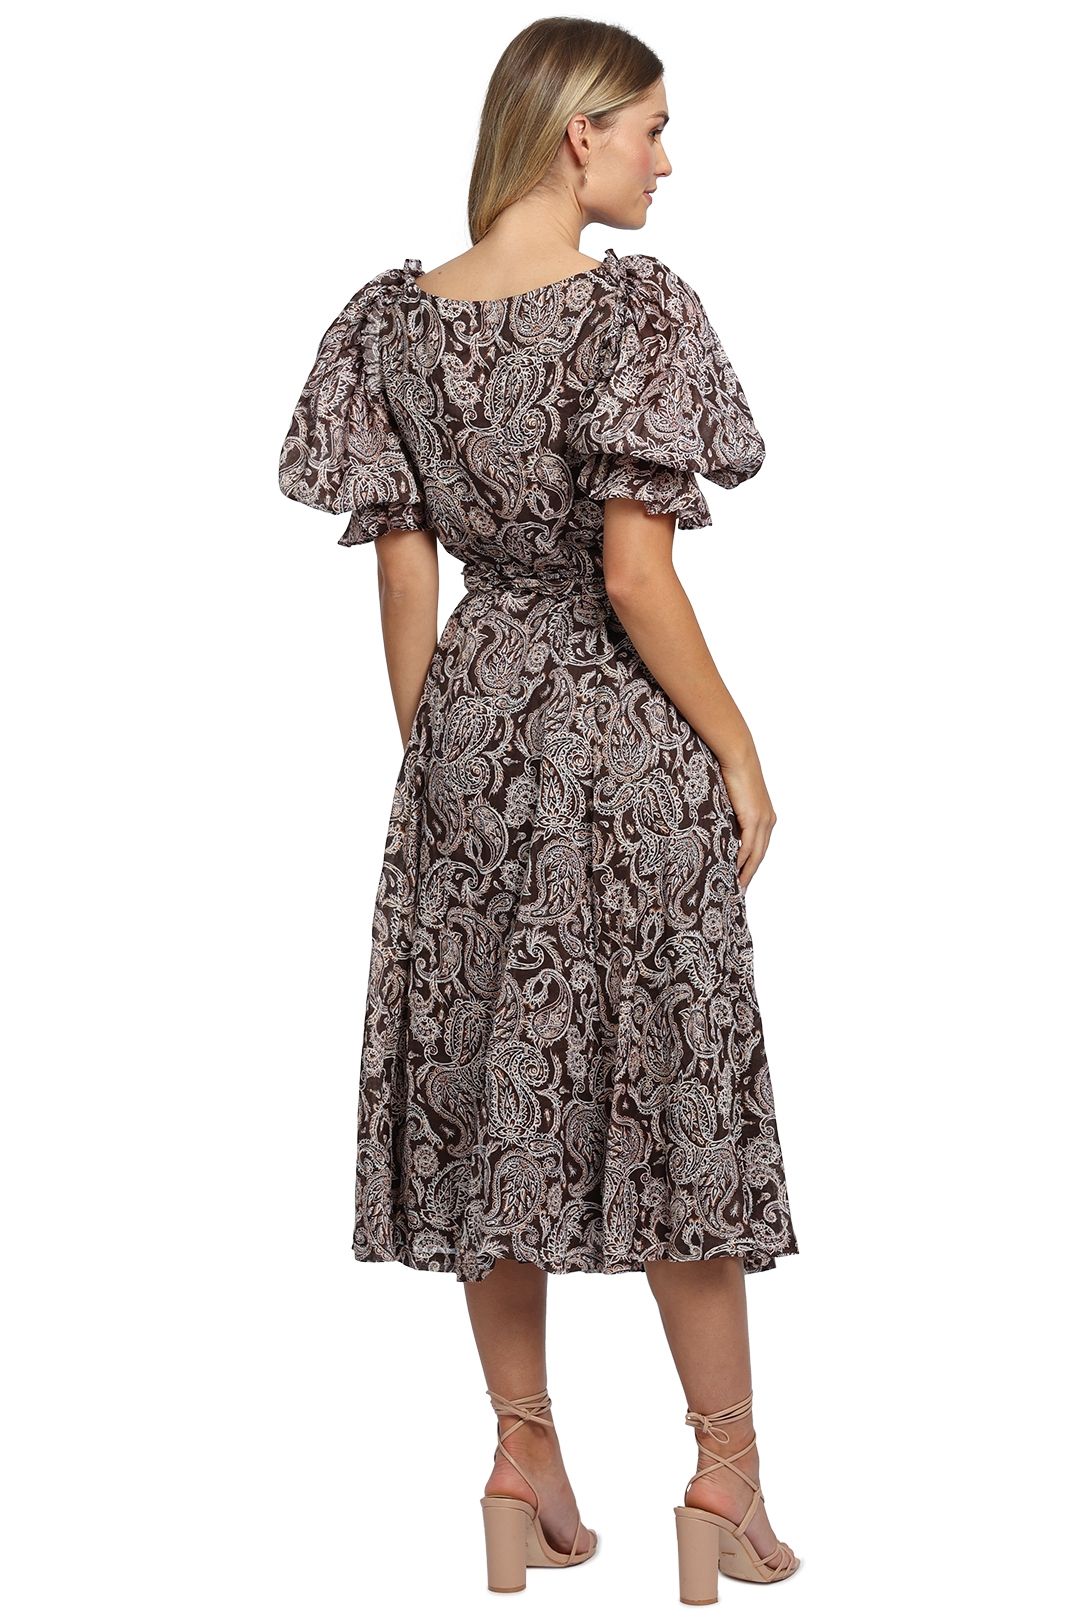 Ministry of Style Prairie Maxi Dress paisley